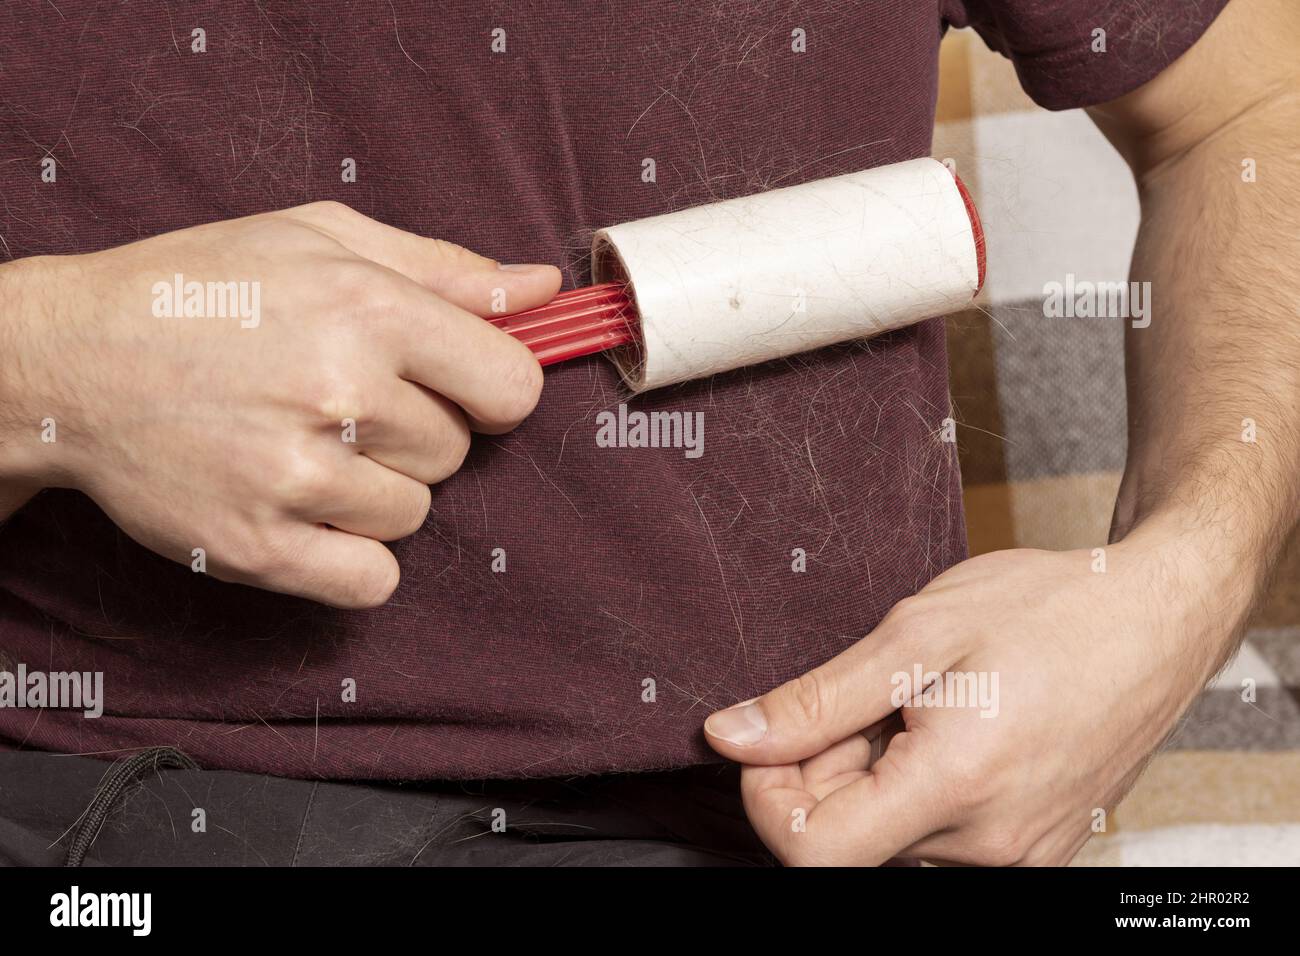 A man with a sticky clothes roller removes animal hair from clothes. Cat hair on clothes. A sticky roller that removes cat hair. a hair removal tool. Stock Photo